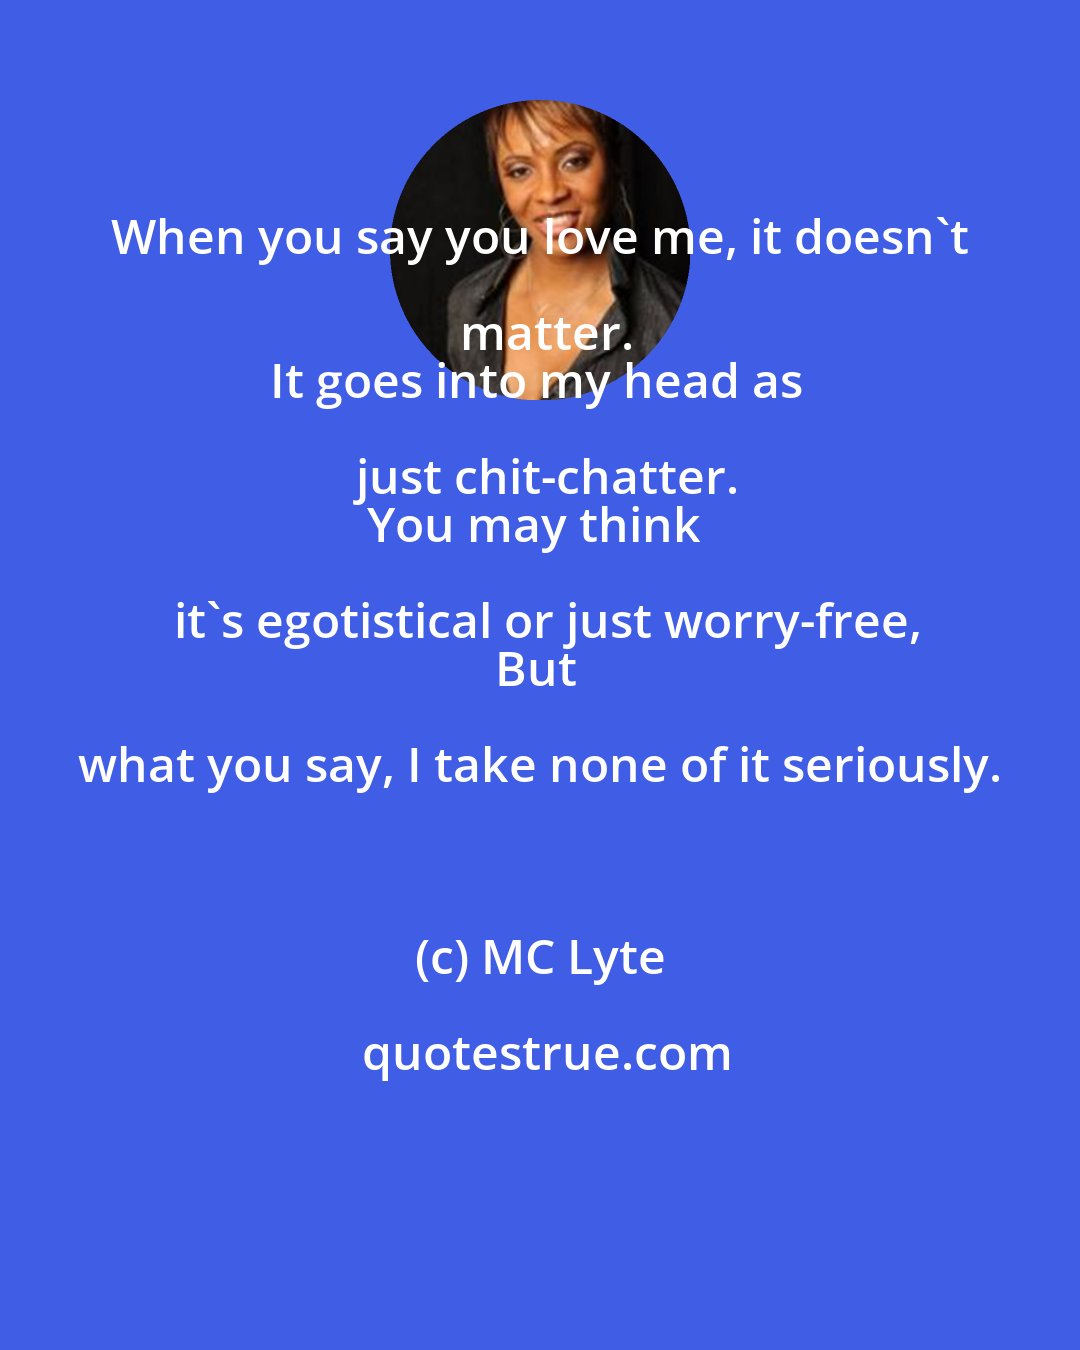 MC Lyte: When you say you love me, it doesn't matter.
It goes into my head as just chit-chatter.
You may think it's egotistical or just worry-free,
But what you say, I take none of it seriously.